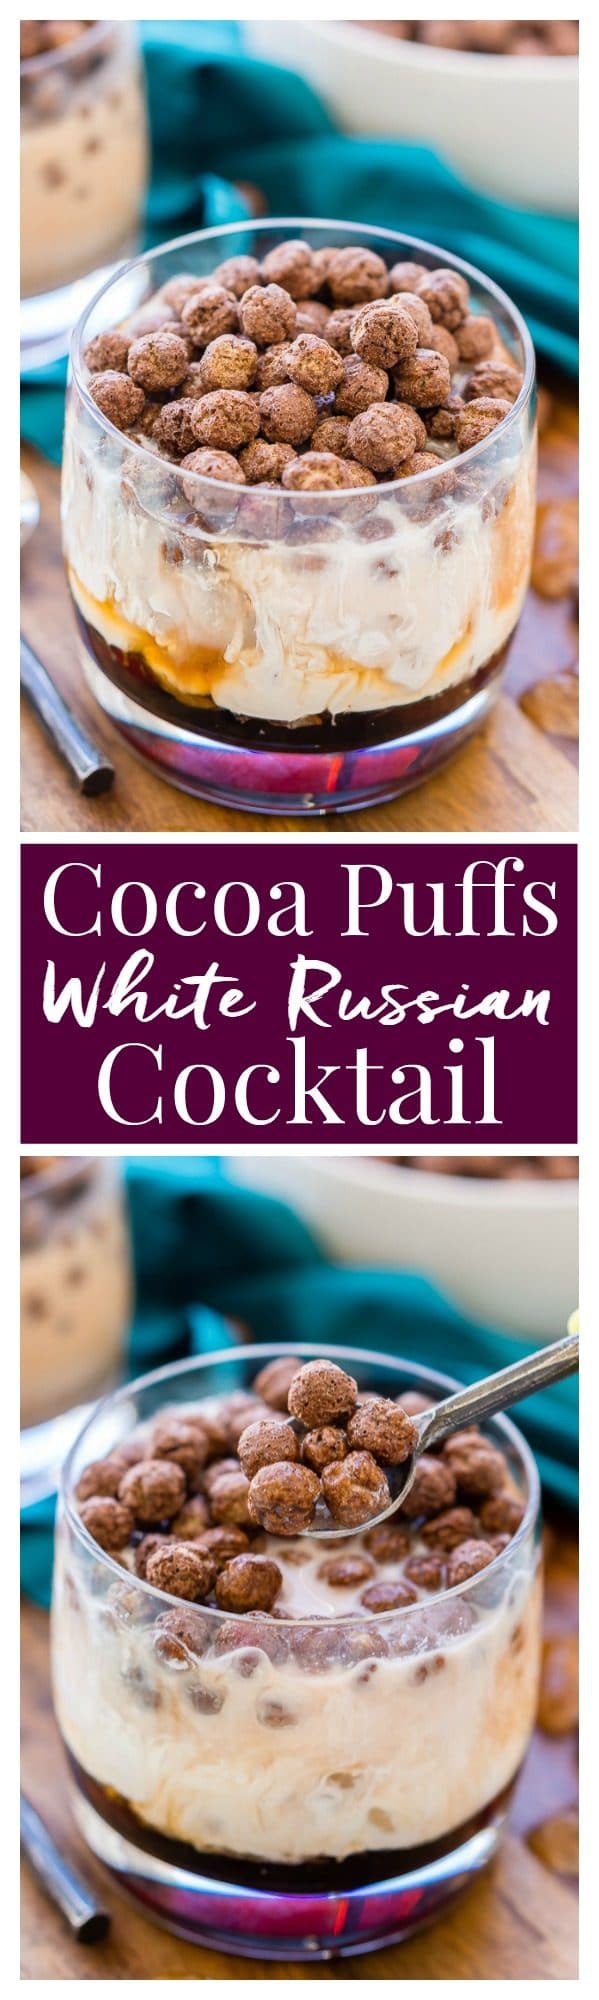 cocoa puffs white russian cocktail